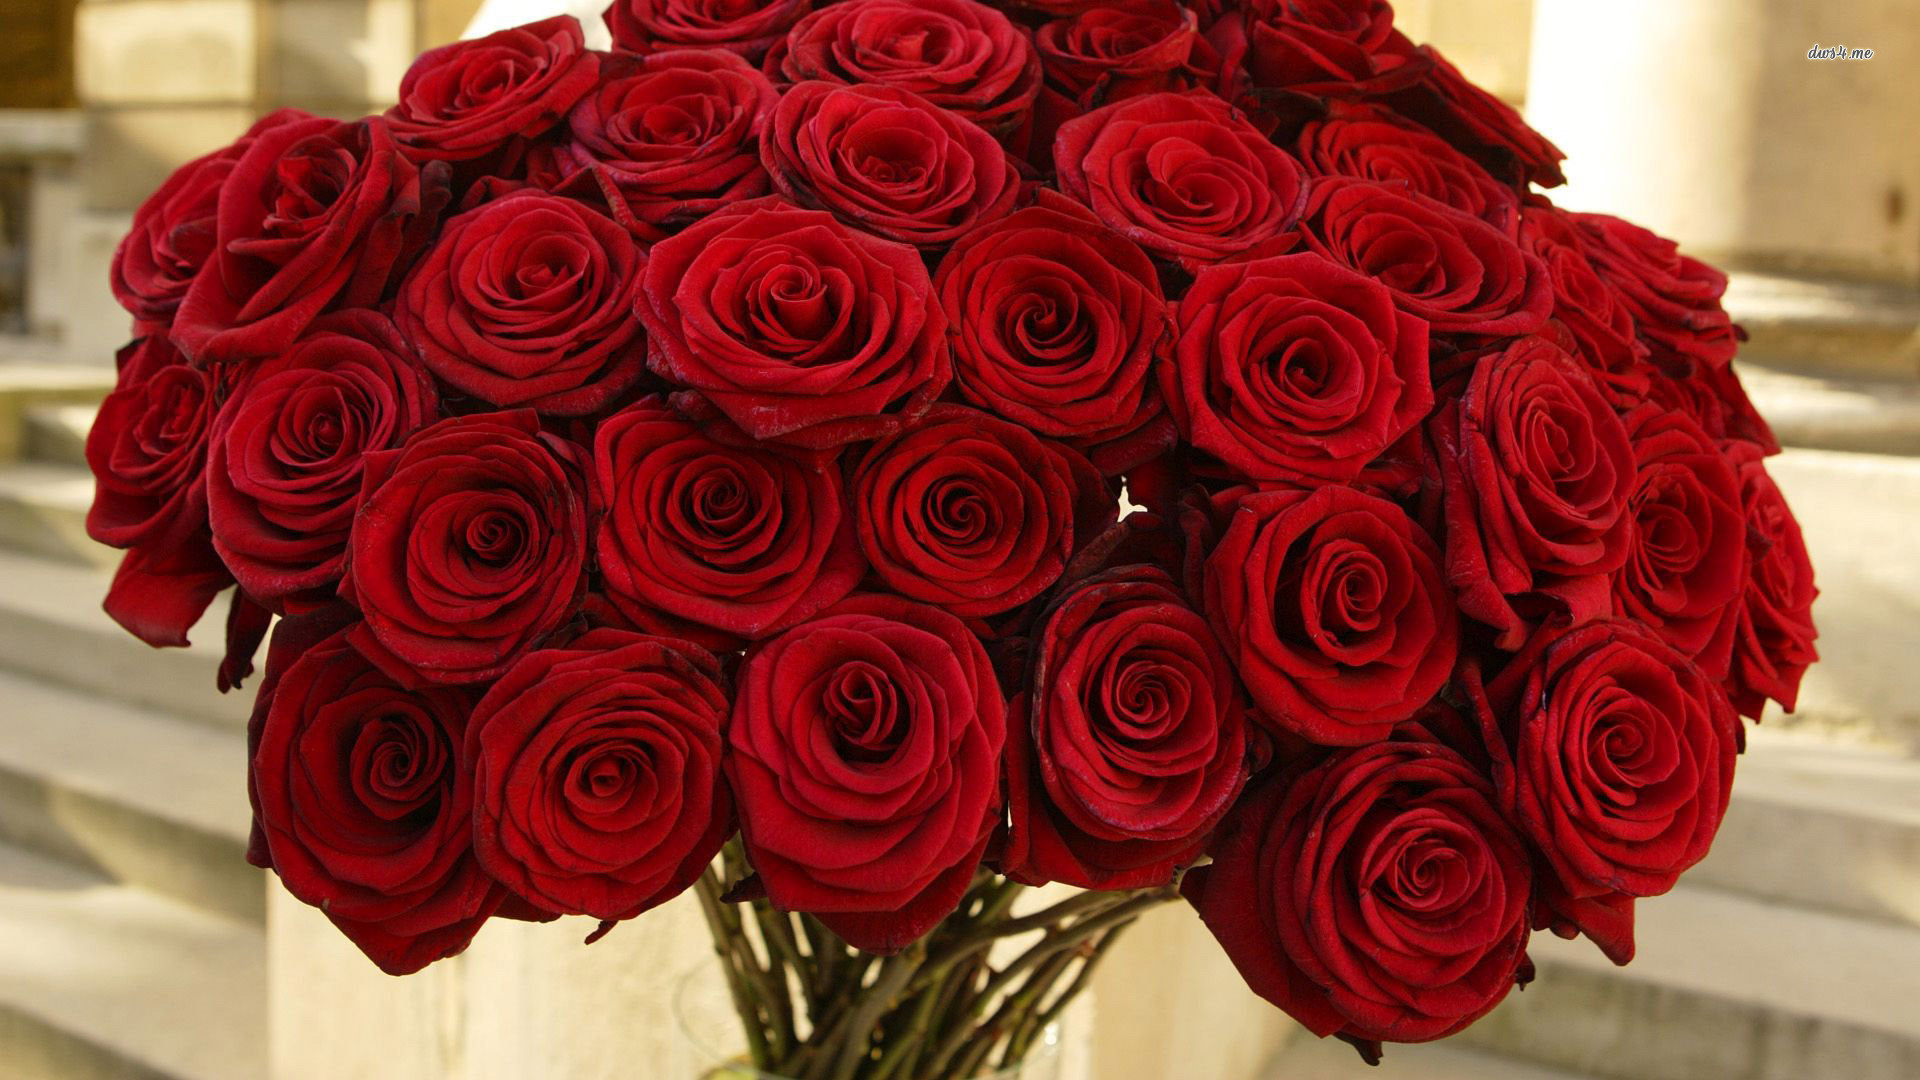 1920x1080 RED AND WHITE ROSES WALLPAPER